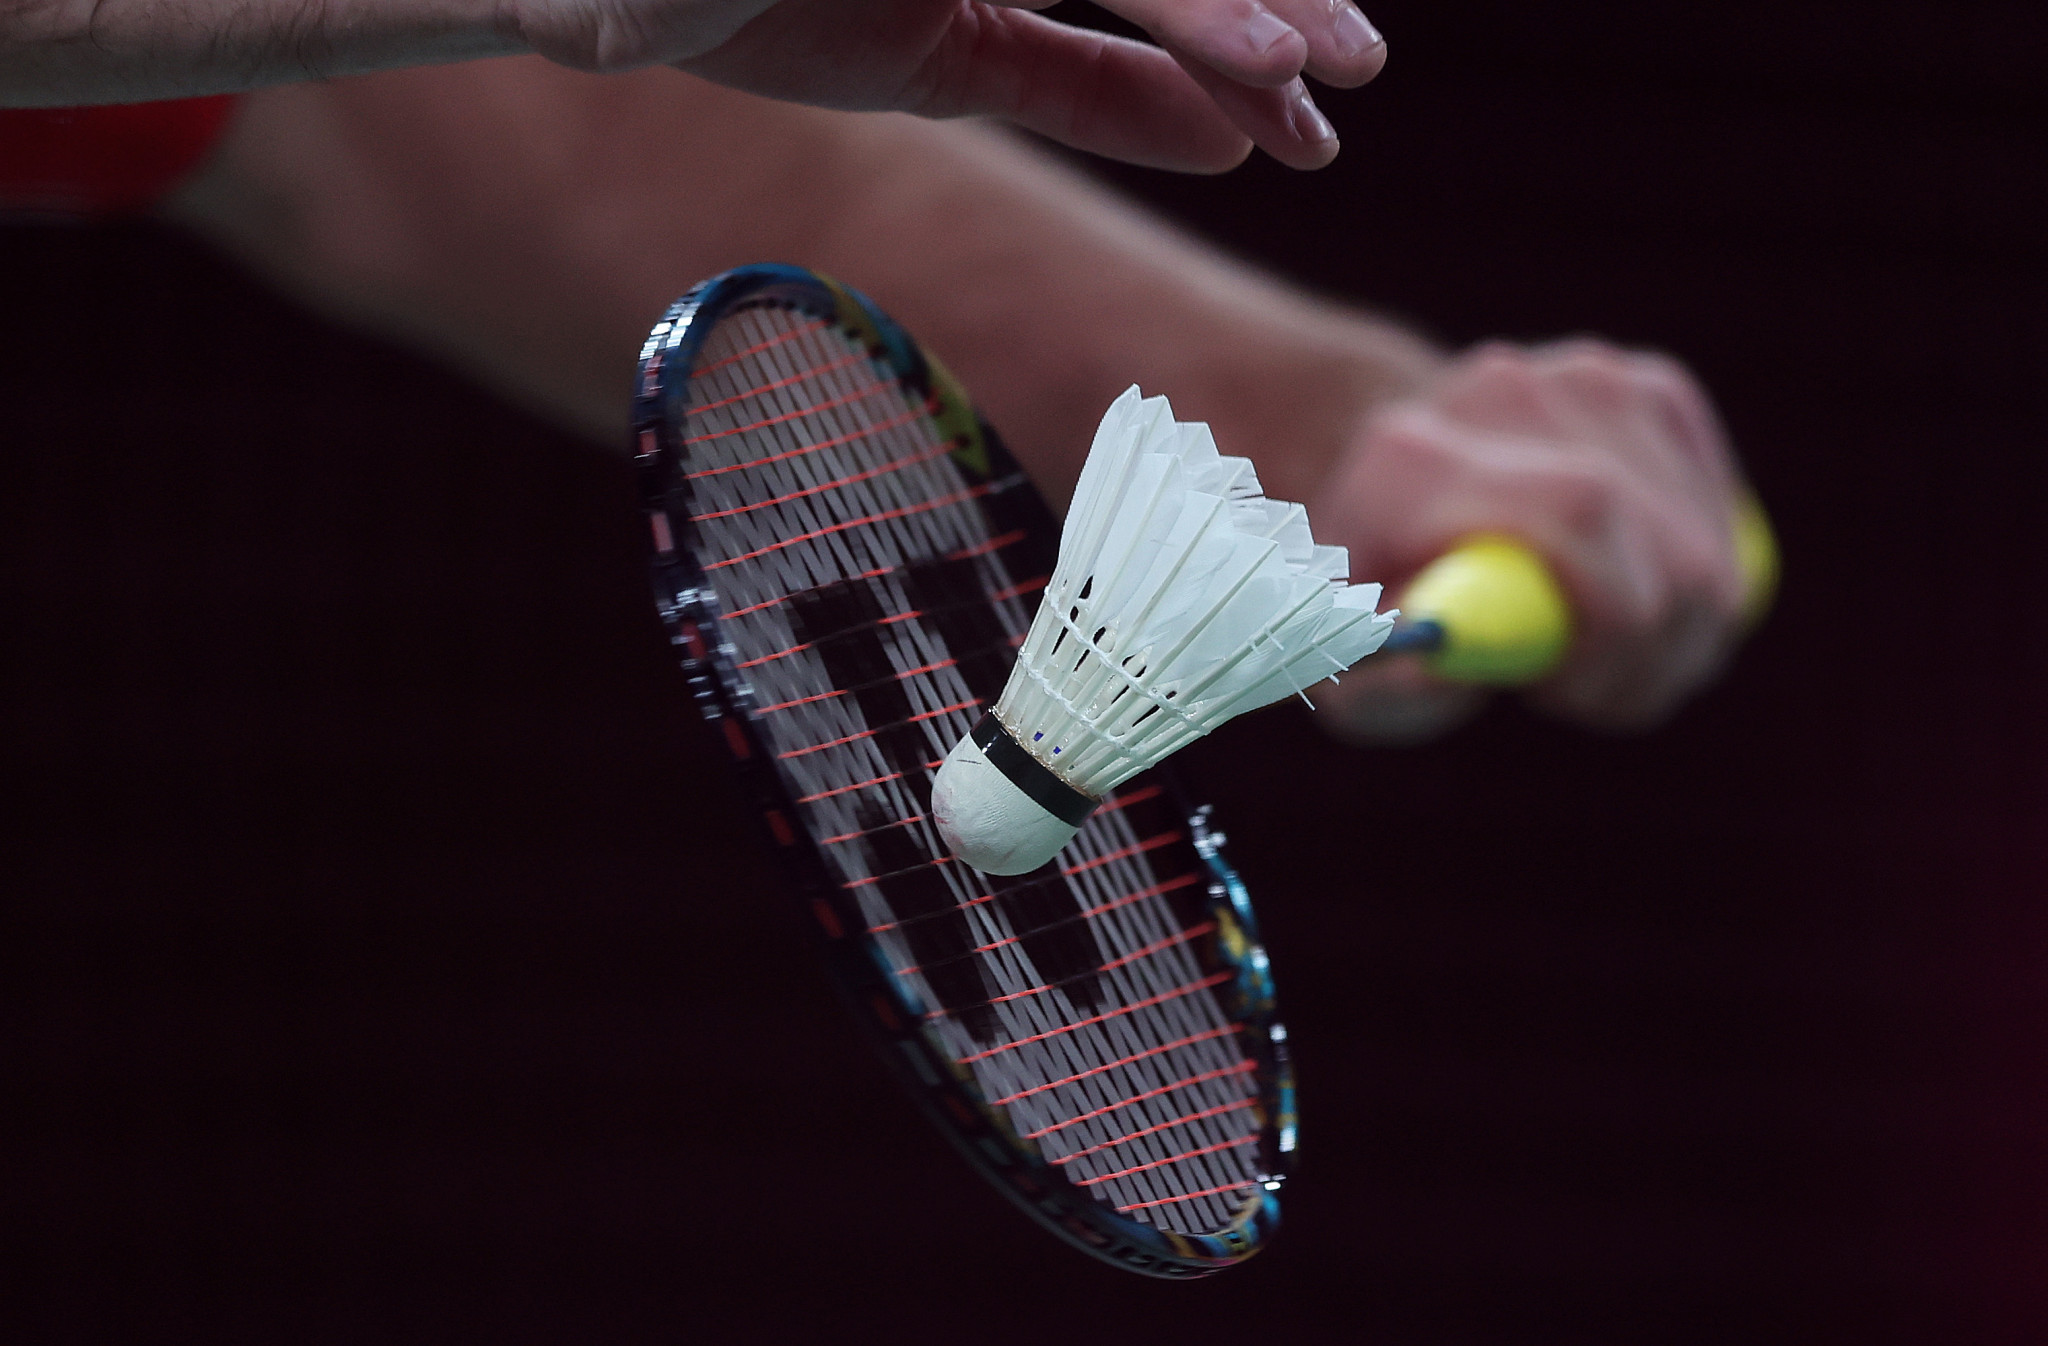 New Badminton England structure to develop "rounded players" in doubles and singles